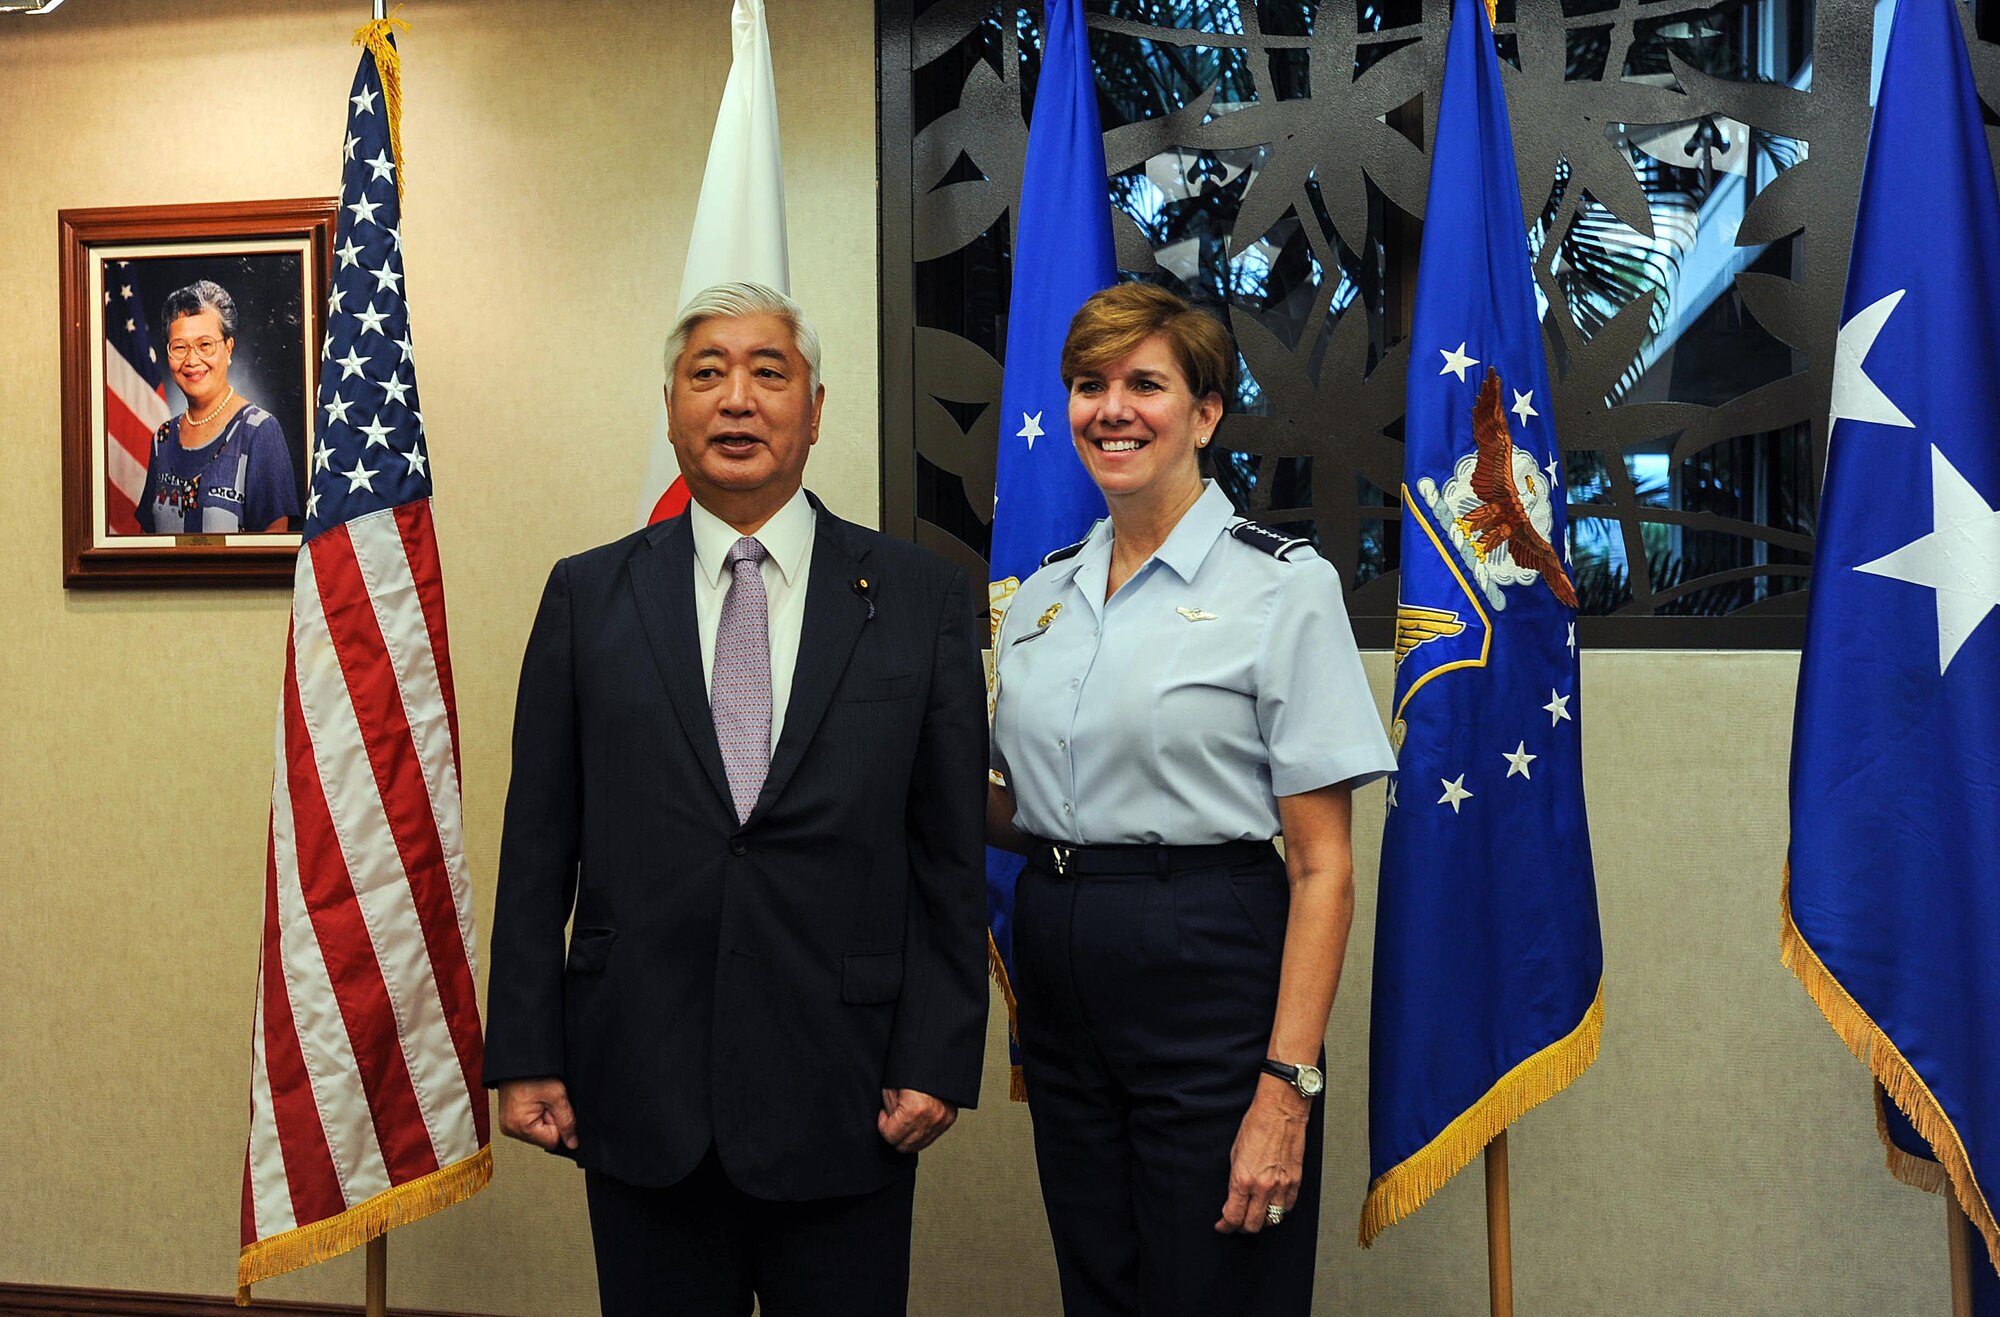 U.S. Air Force Gen. Lori J. Robinson (right), Pacific Air Forces commander, meets with Japan Minister of Defense Gen Nakatani during his visit to PACAF, Joint Base Pearl Harbor-Hickam, Hawaii, Nov. 24, 2015. Nakatani and members of his defense forces were here to conduct bilateral talks with U.S. Pacific Command and PACAF about ongoing and future operations in the Indo-Asia-Pacific region. (U.S. Air Force photo by Tech. Sgt. Amanda Dick/Released)